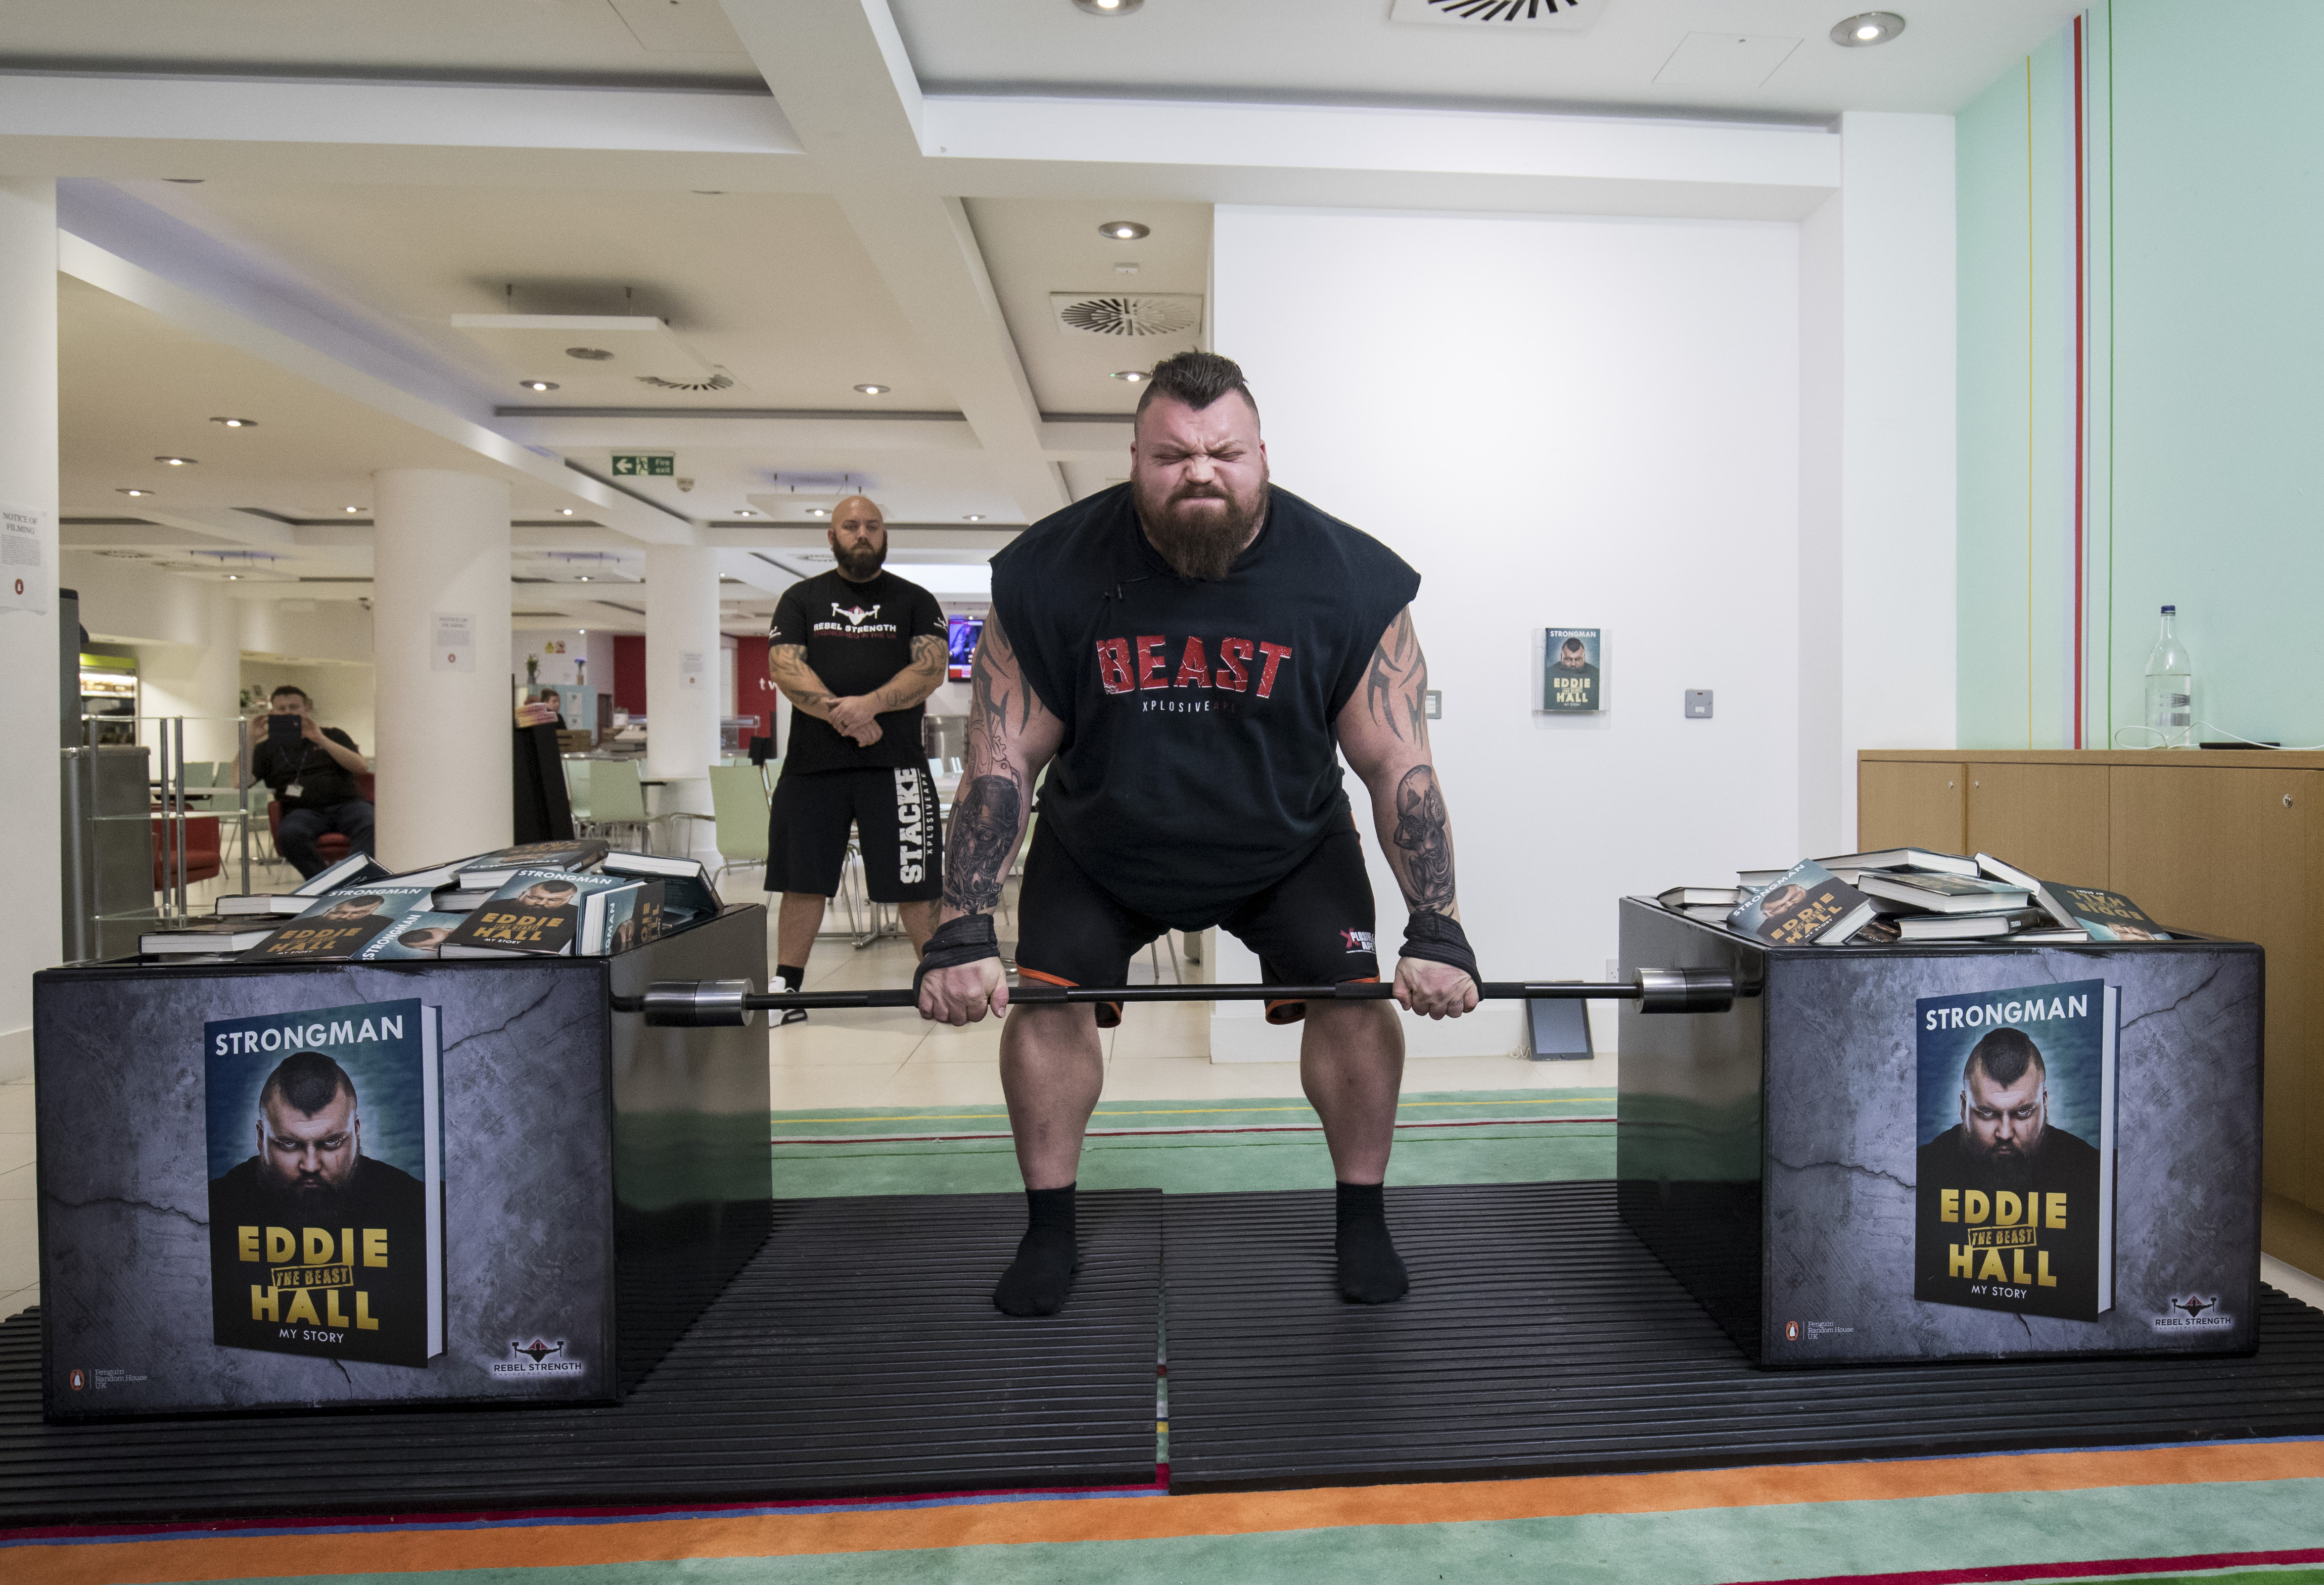 Eddie Hall vs Thor date, UK time, how to watch Beast v Hafthor Bjornsson boxing match, weigh in, fight purse